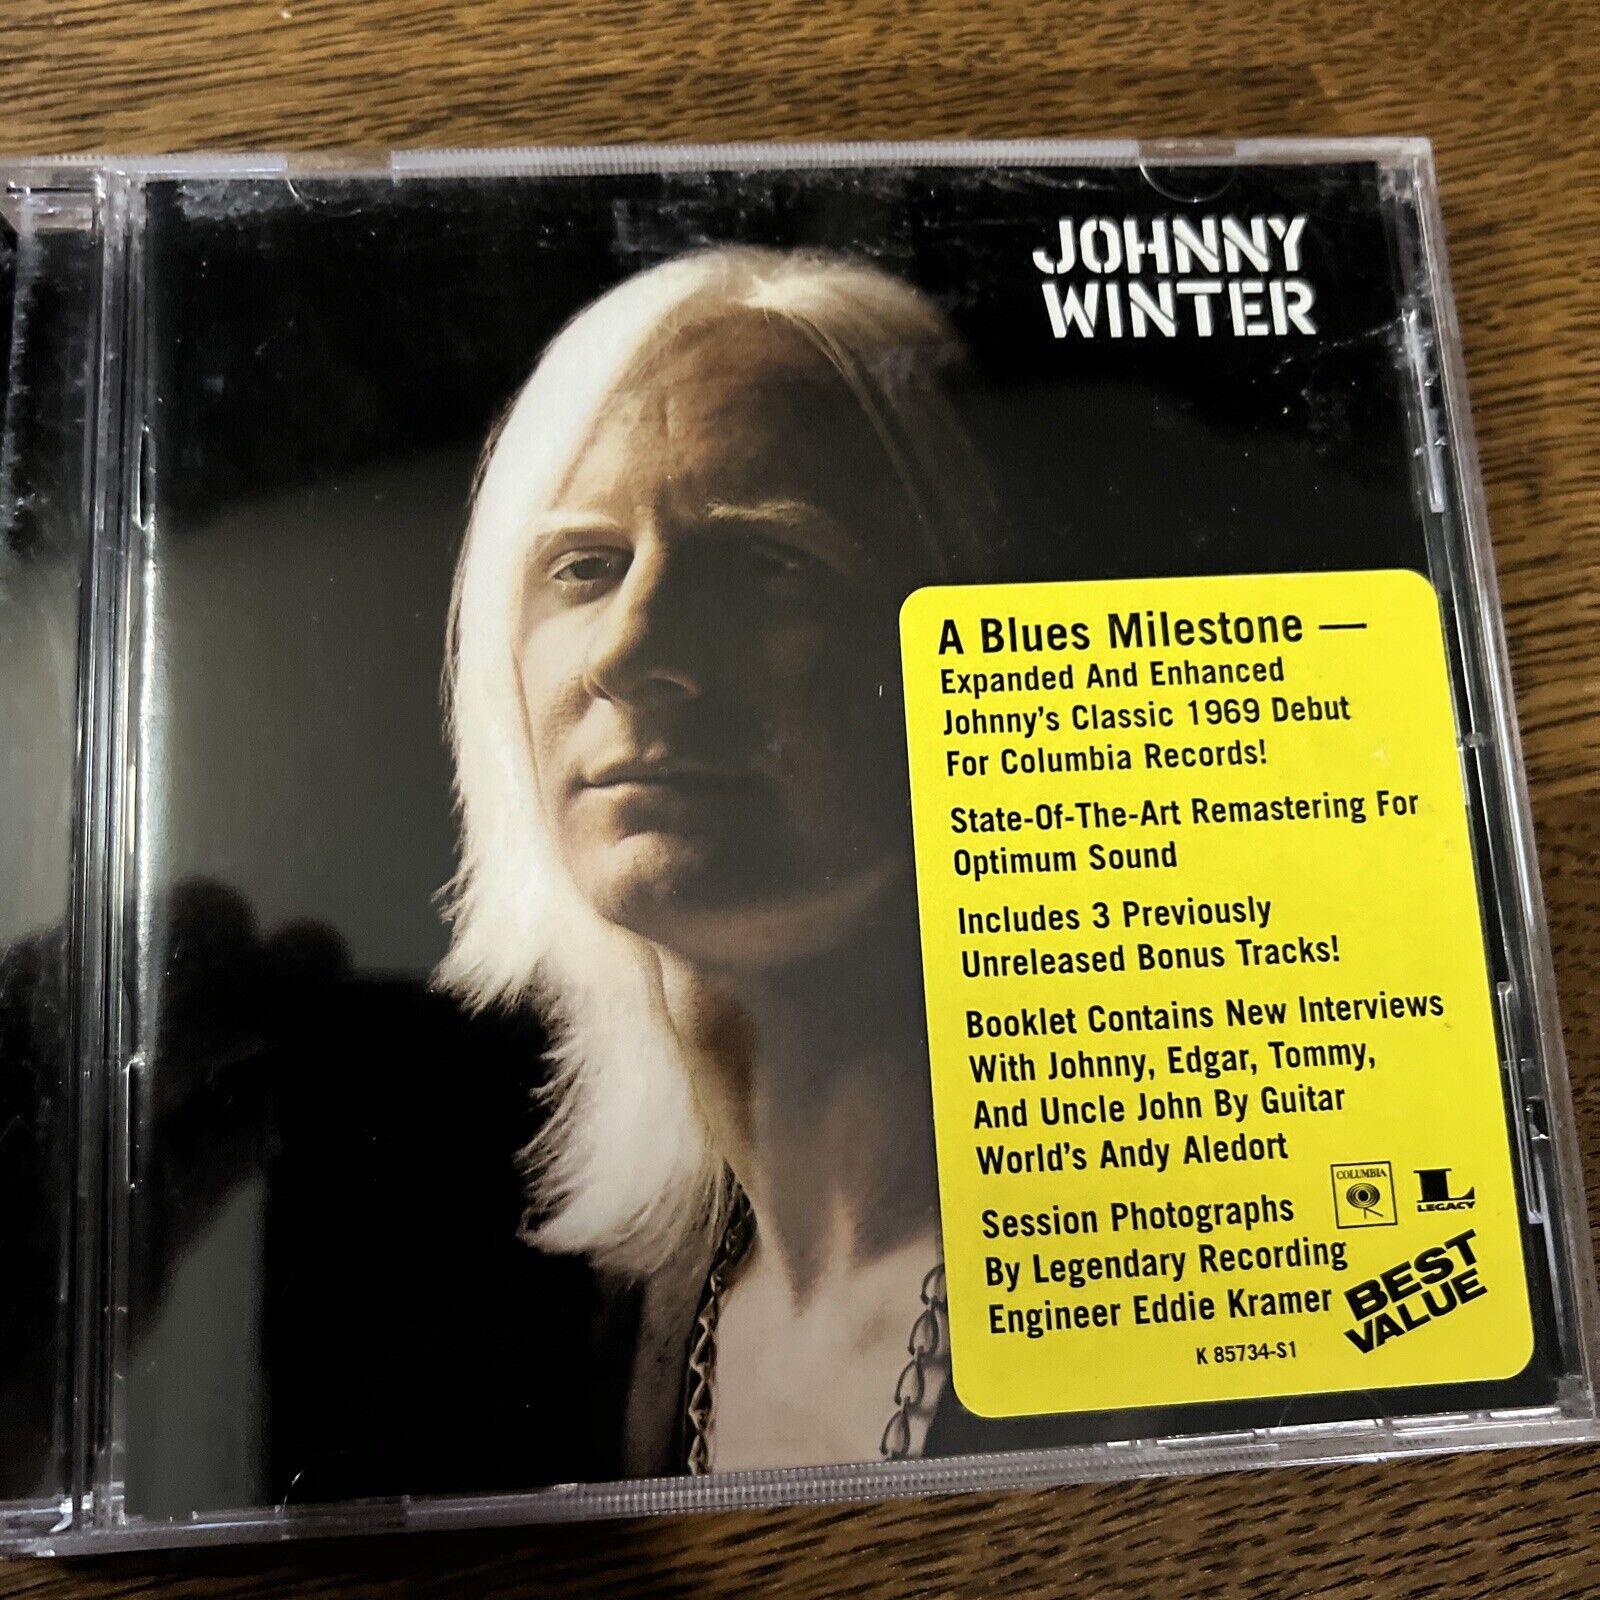 Johnny Winter [Expanded] [Remaster] by Johnny Winter (CD, May-2004, Epic/Legacy)